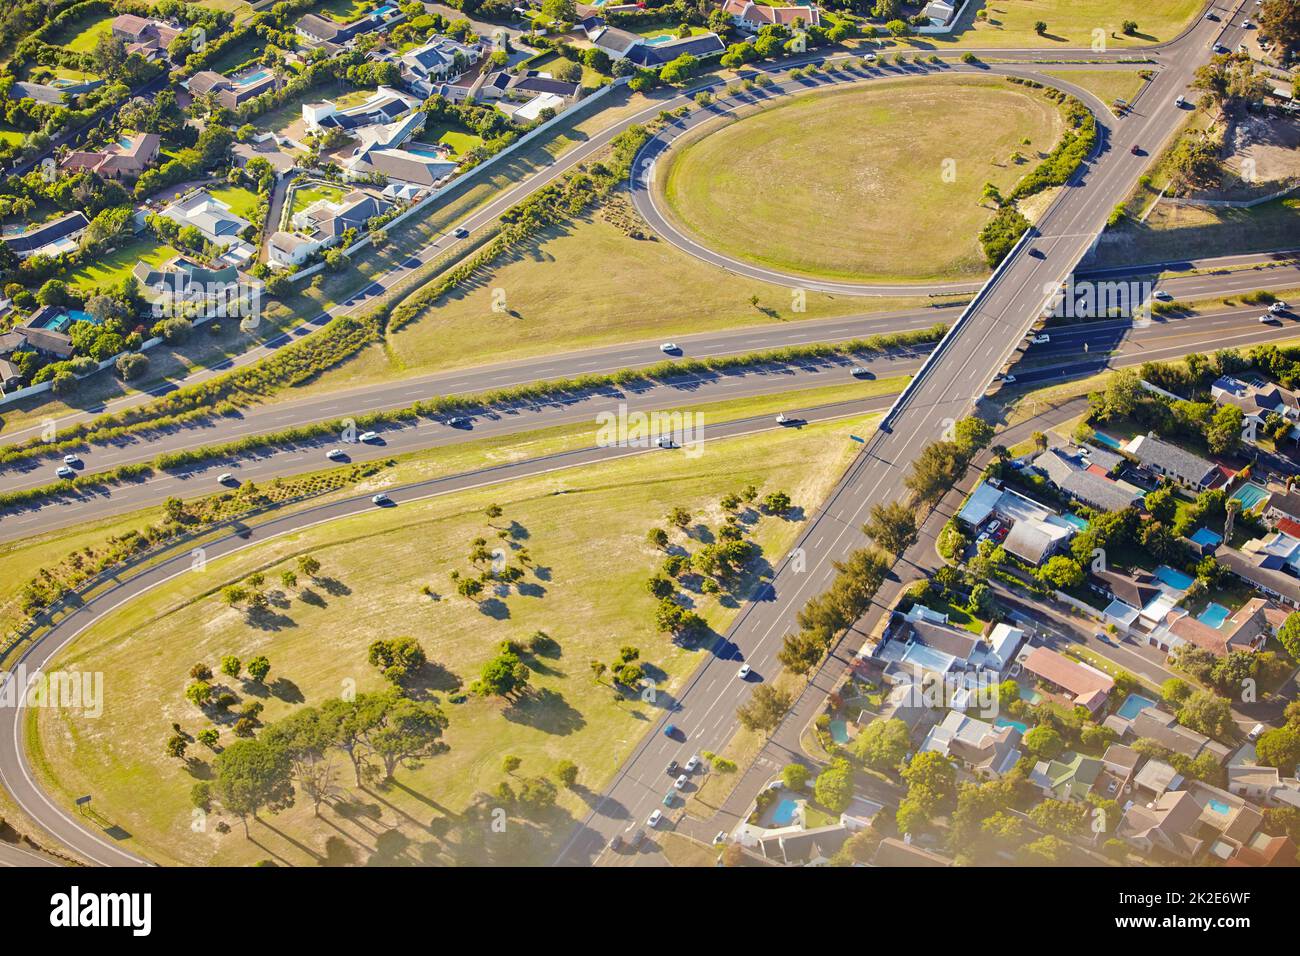 Urban arteries. Aerial view of a highway running through suburbs. Stock Photo